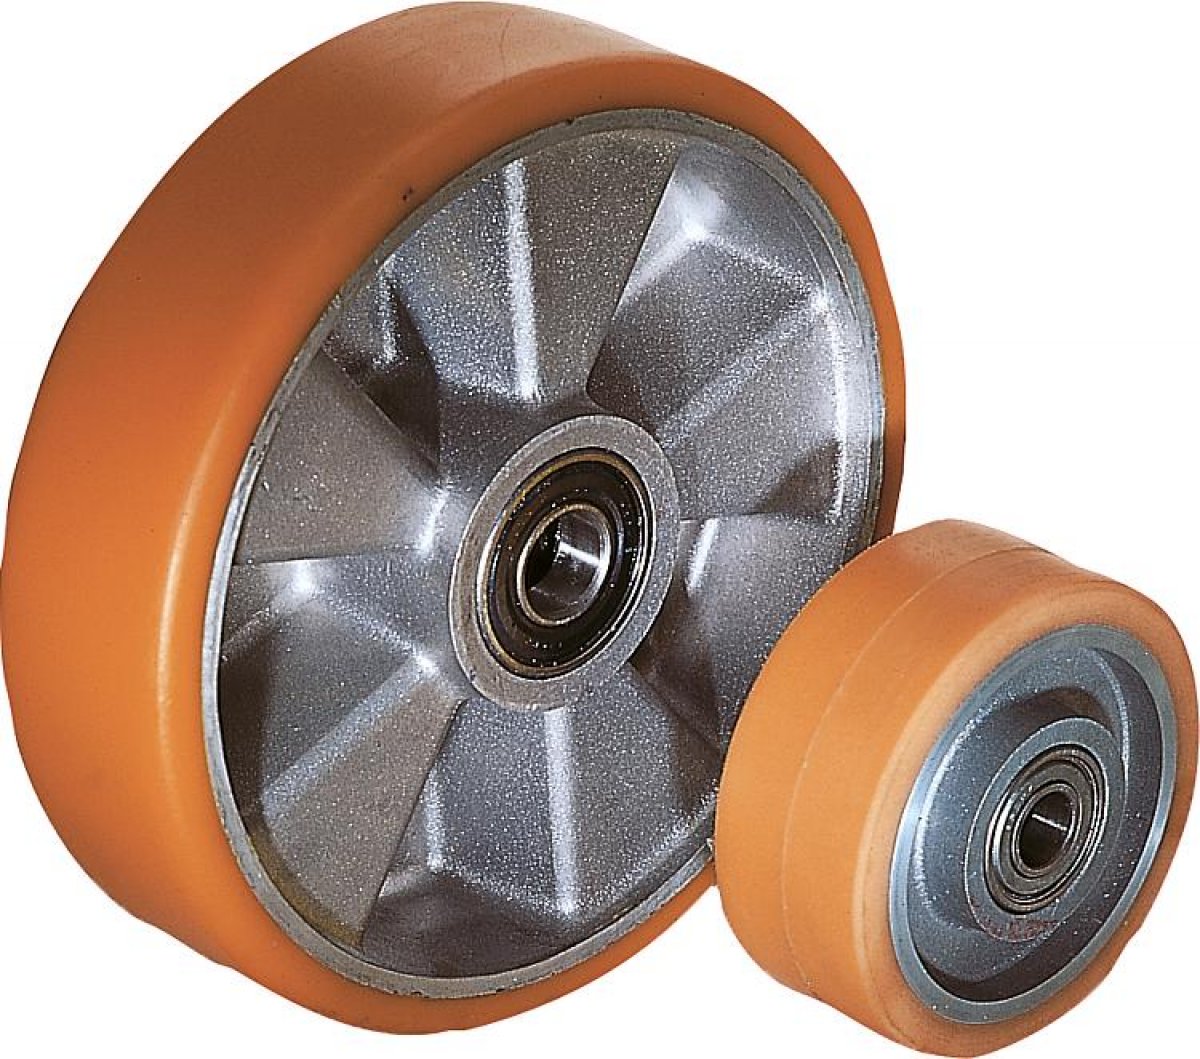 Wheels aluminium rims with injection-moulded tread